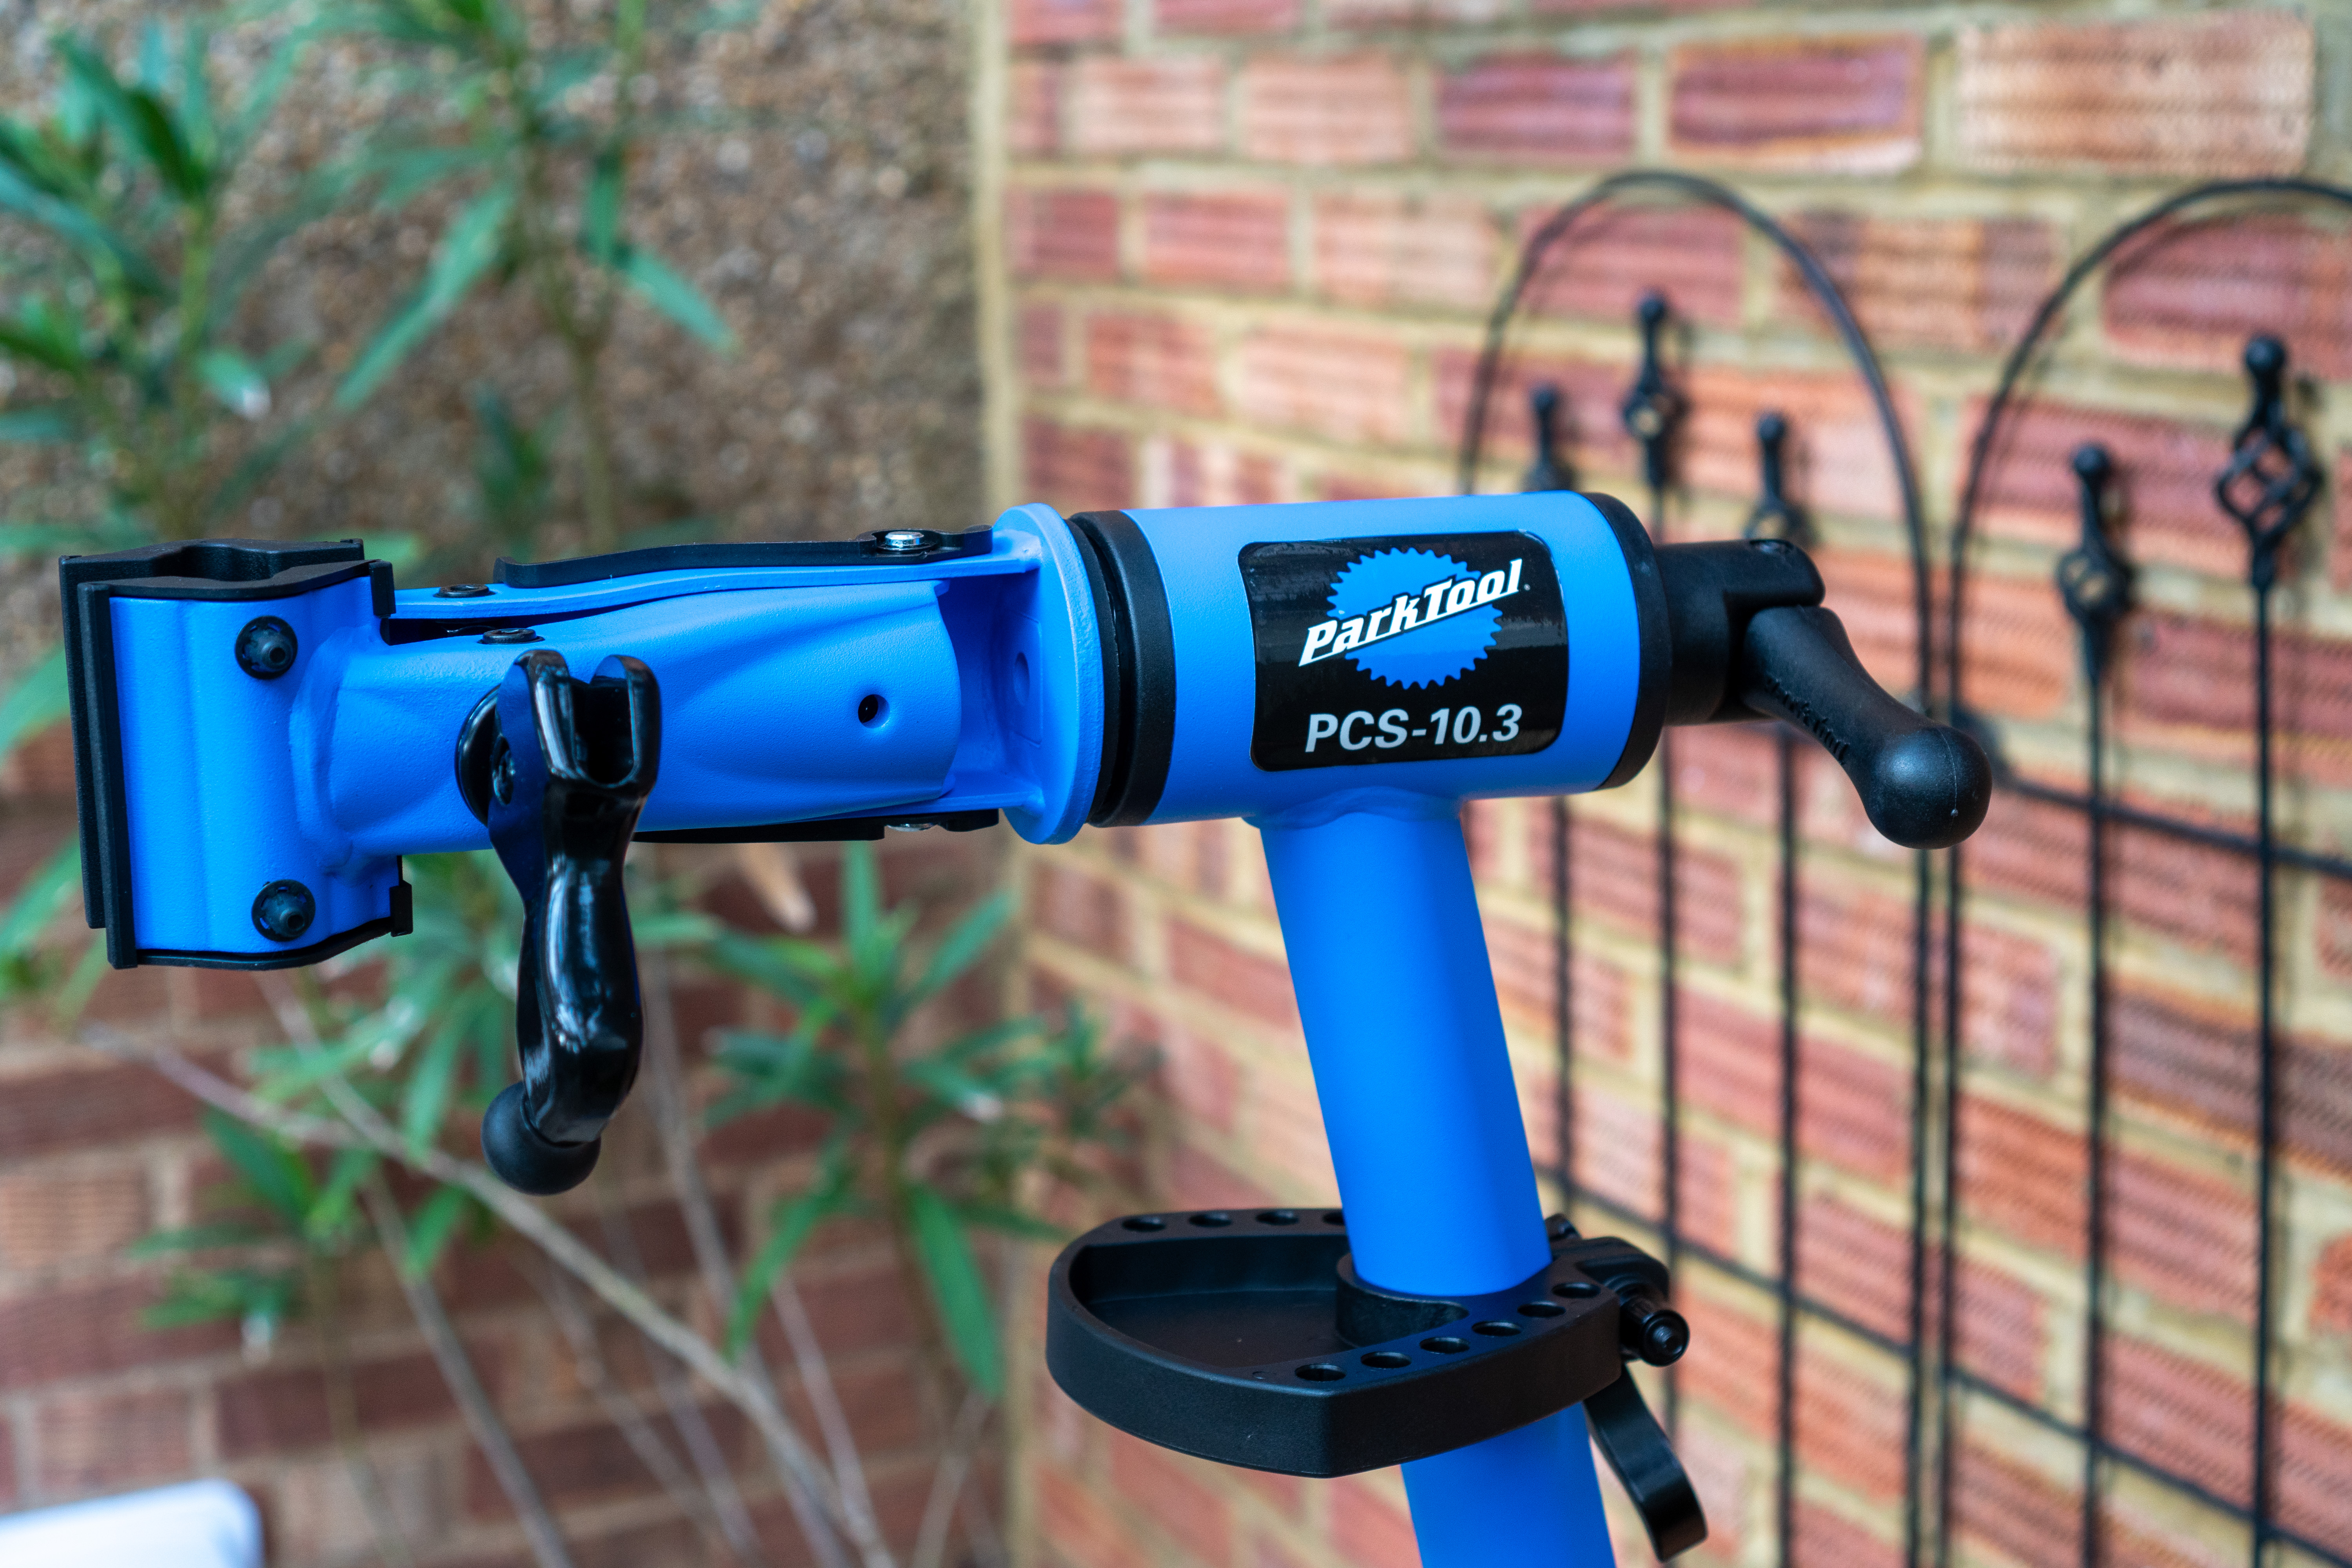 Park Tool PCS-10.3 Deluxe Home Mechanic Repair Stand review